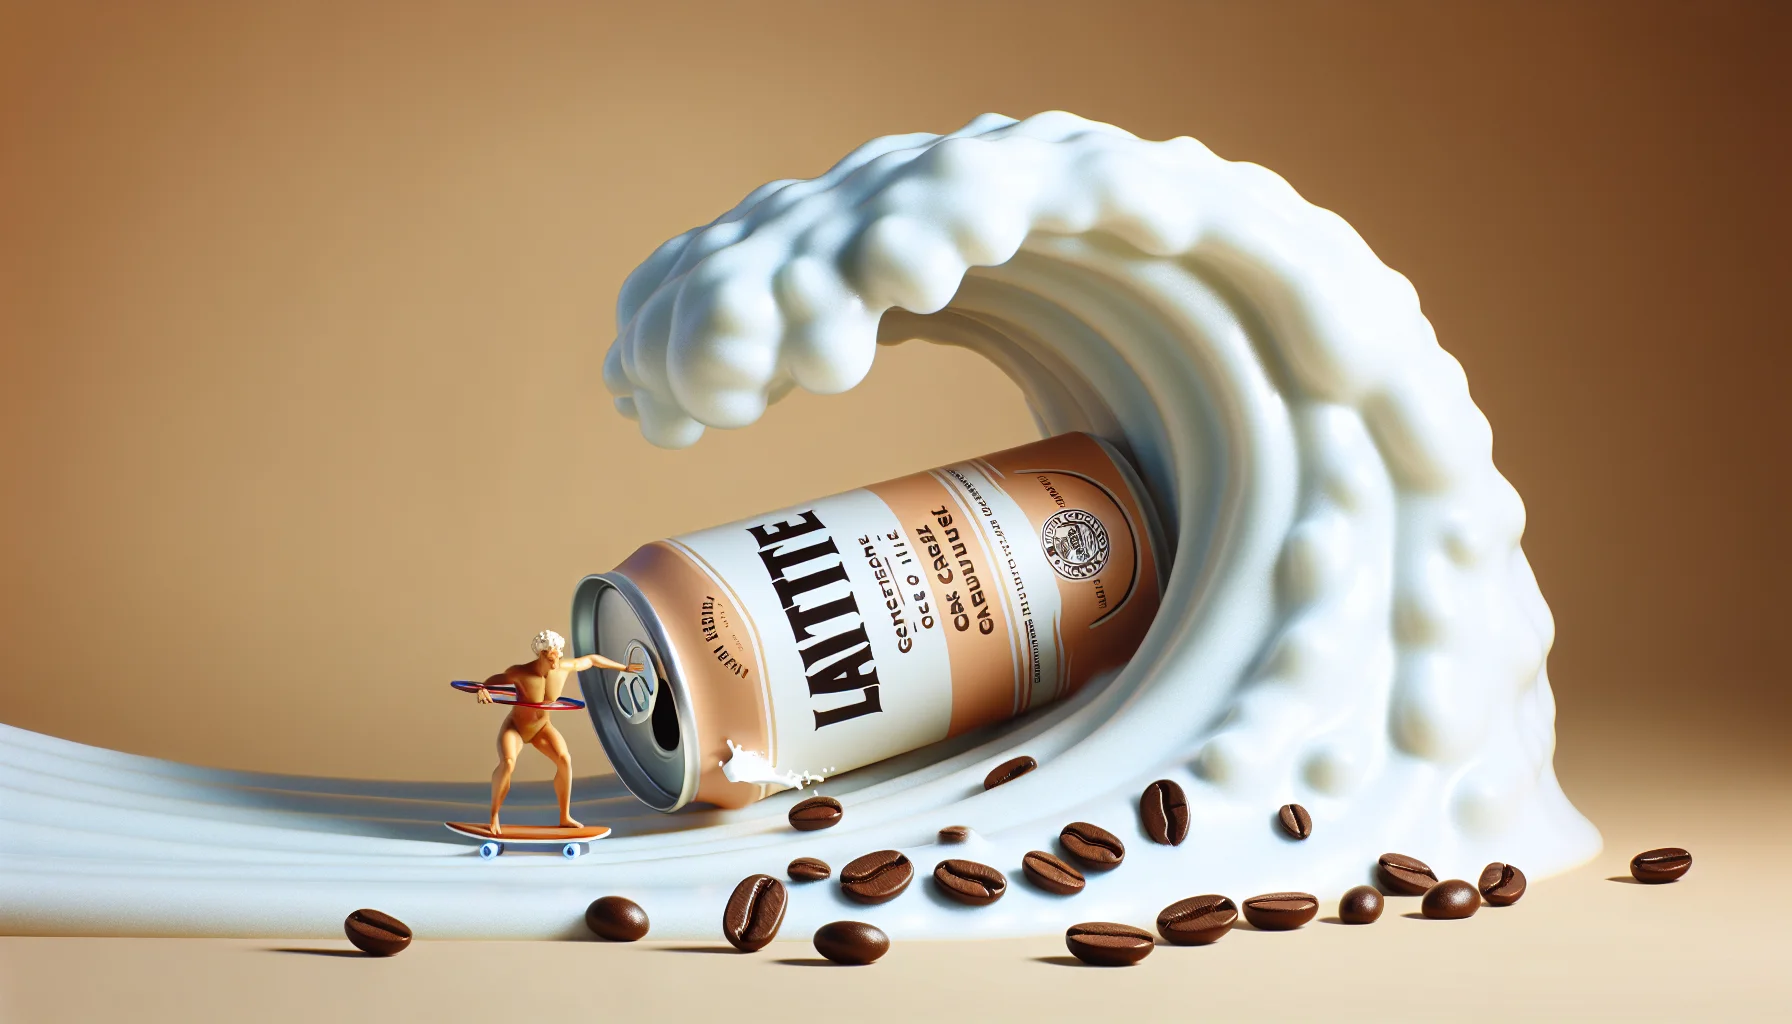 Generate a humorous, realistic scene centered around a can of generically-branded latte. Perhaps the latte is surfing a wave made of creamy froth, or maybe the can is hula hooping with coffee beans. The scene should be playful and lively, designed in a way that seems enticing and inviting to viewers, and makes them imagine the rich, satisfying taste of a good latte.